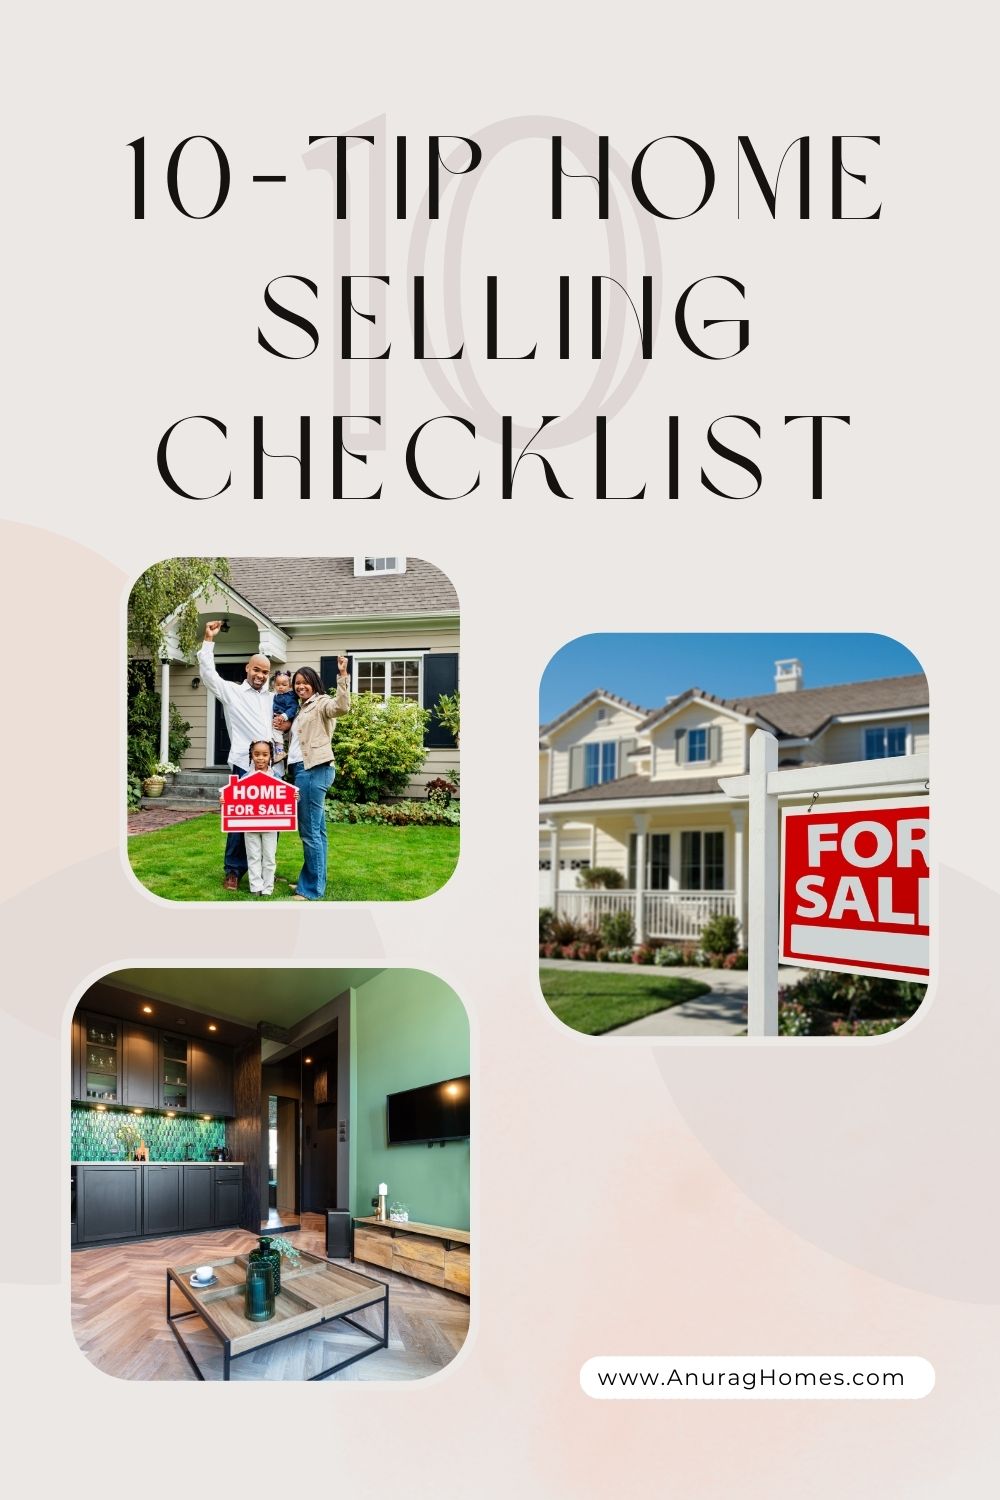 10-Tip Home Selling Checklist